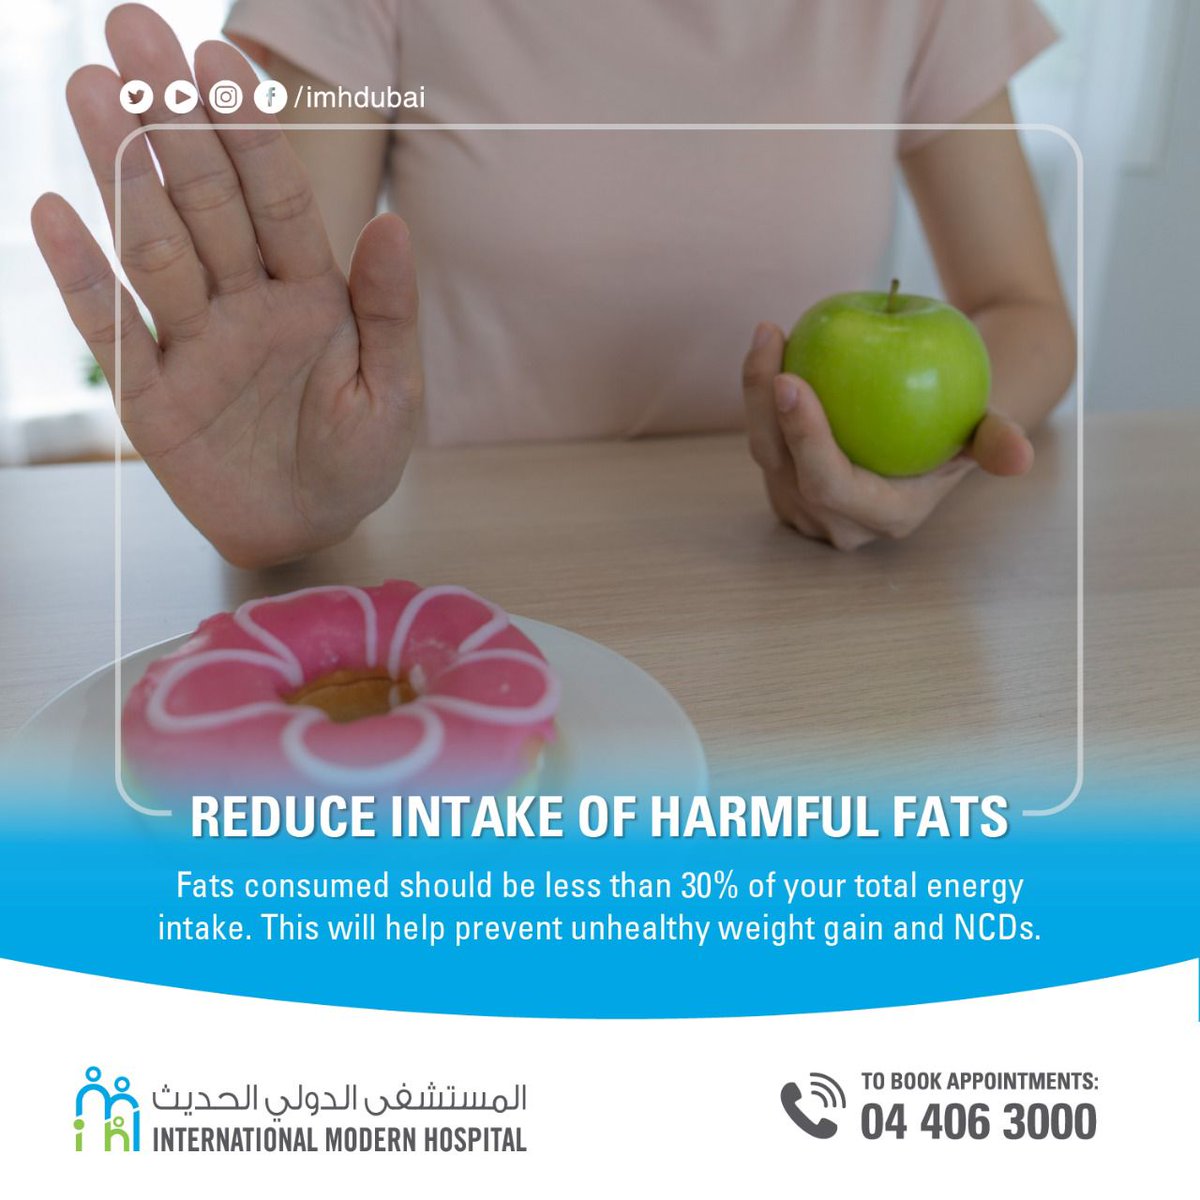 Fats consumed should be less than 30% of your total energy intake. This will help prevent unhealthy weight gain and NCDs. #imh #imhdubai #healthylifestyle #healthyips